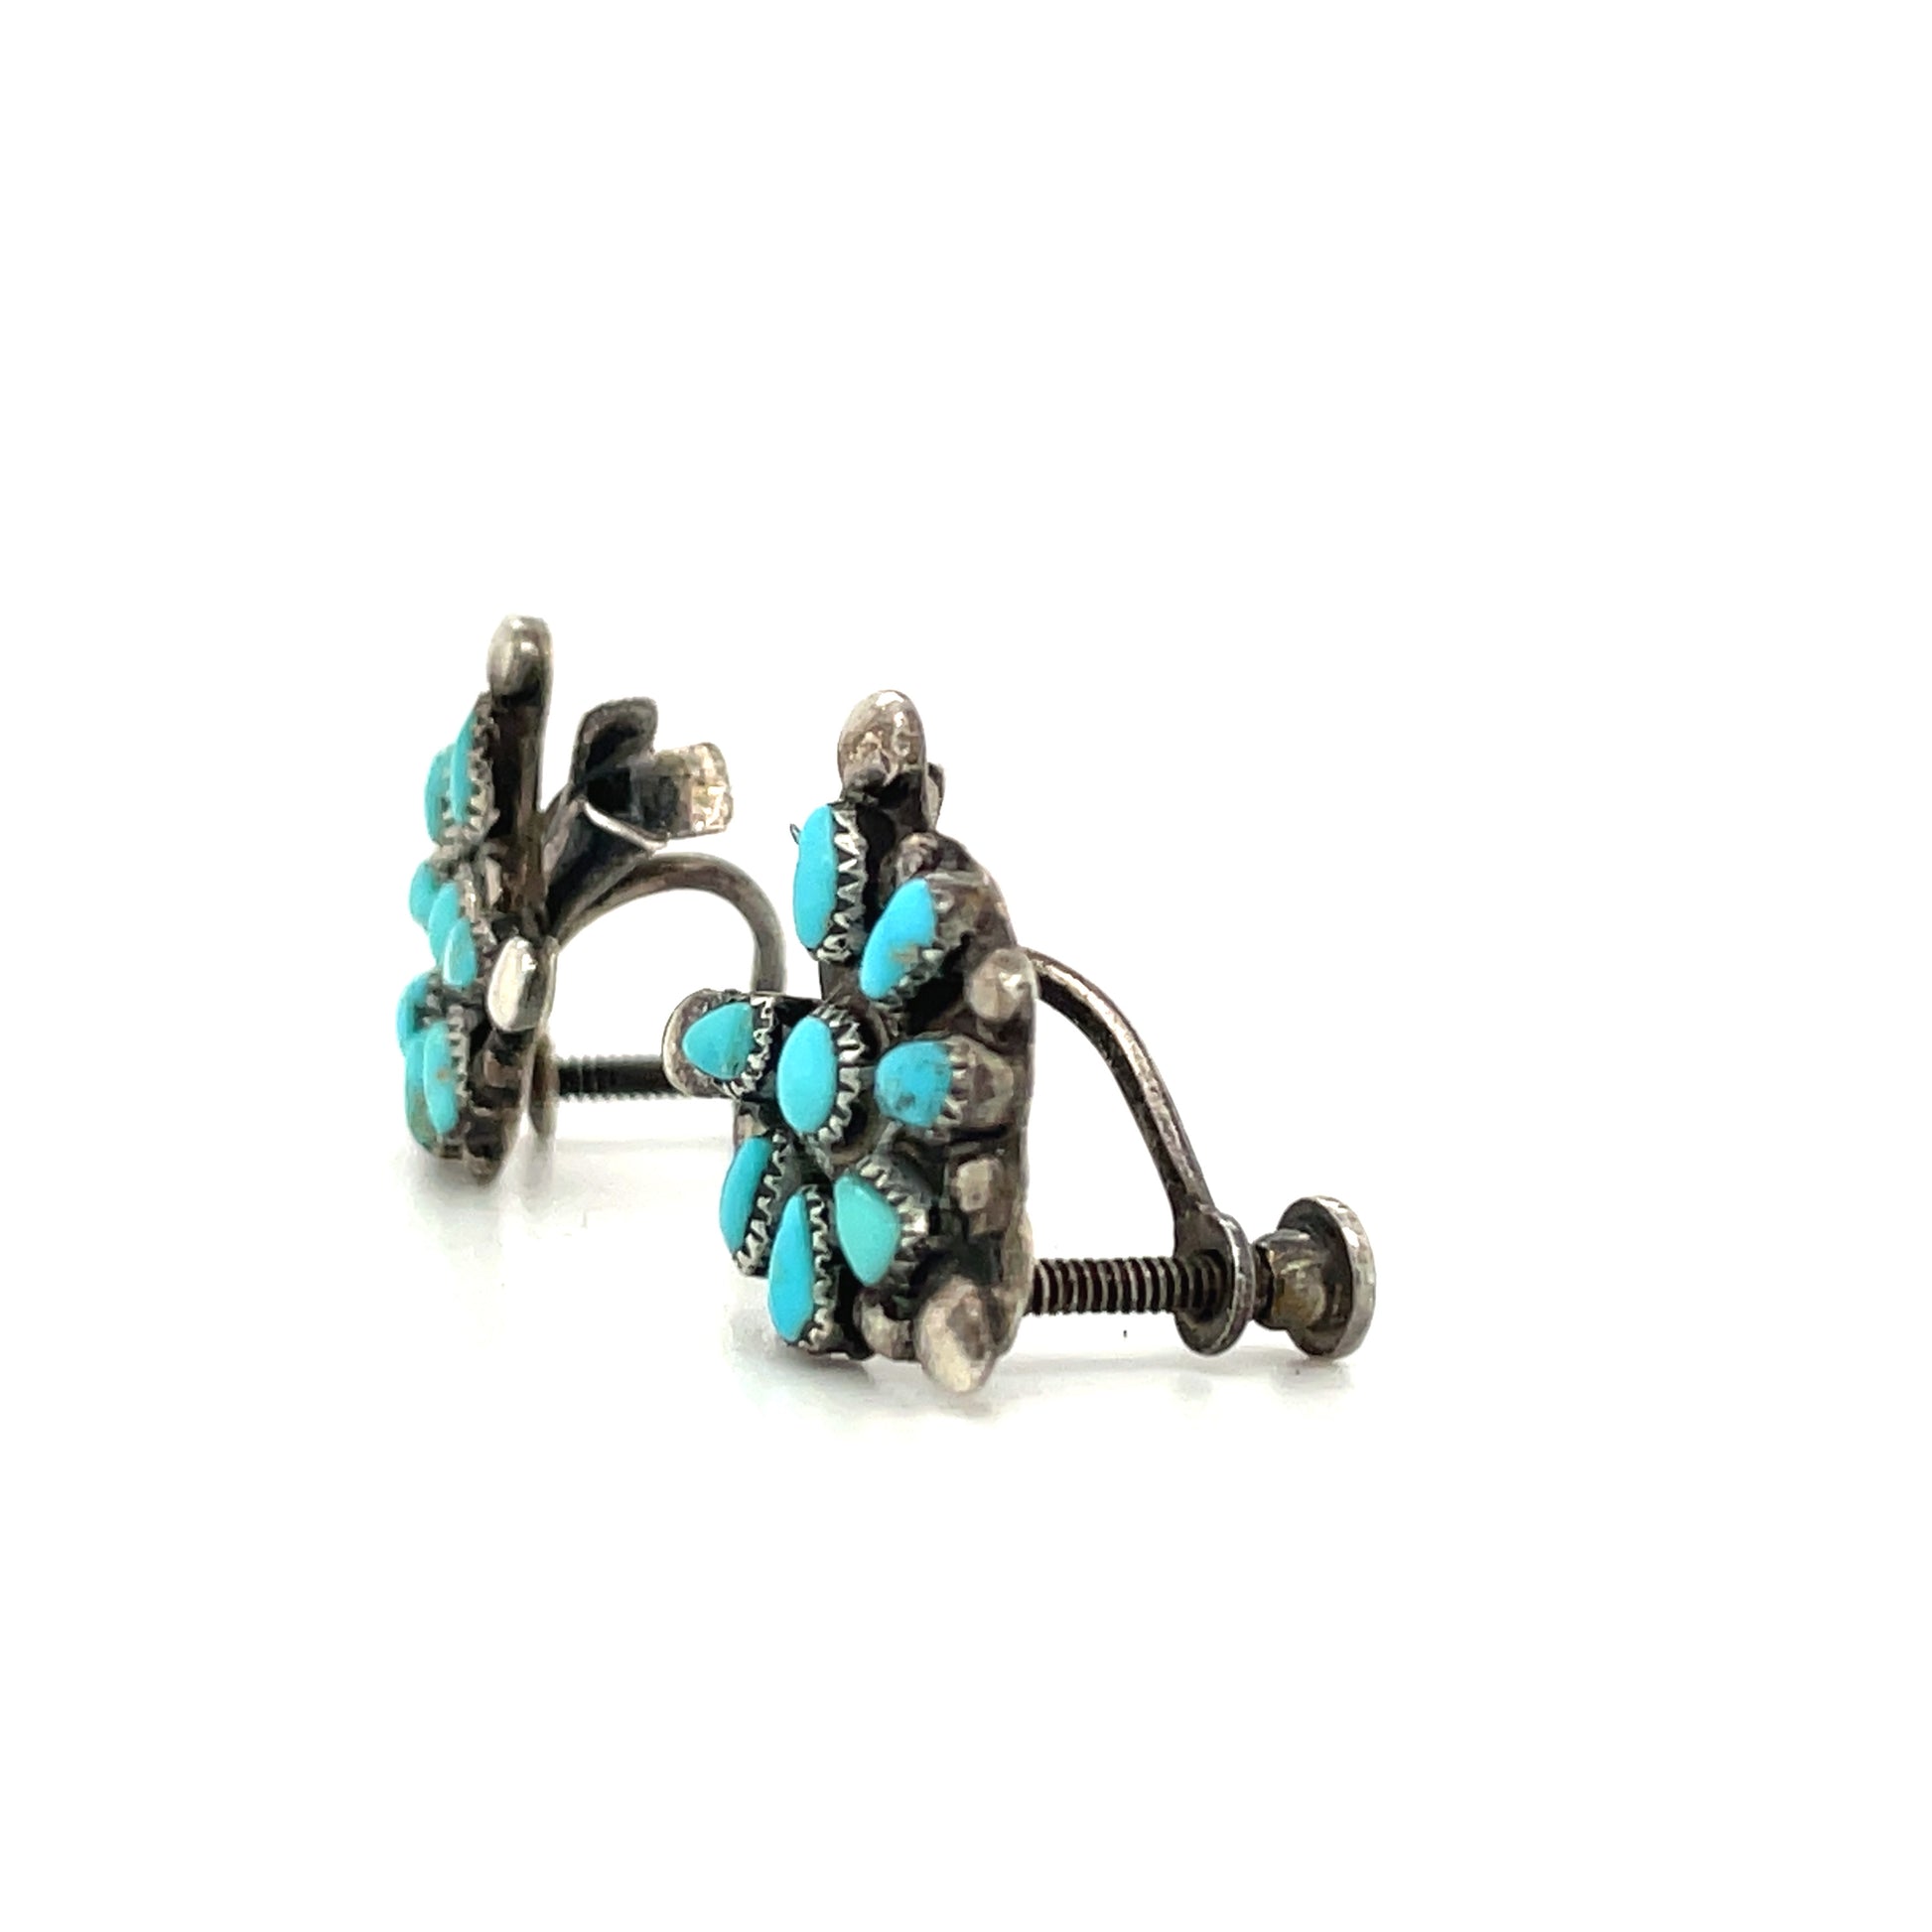 Vintage Sterling Silver Screw Back Earrings 925 - 835 Lot Of 10 Turquoise  Coral